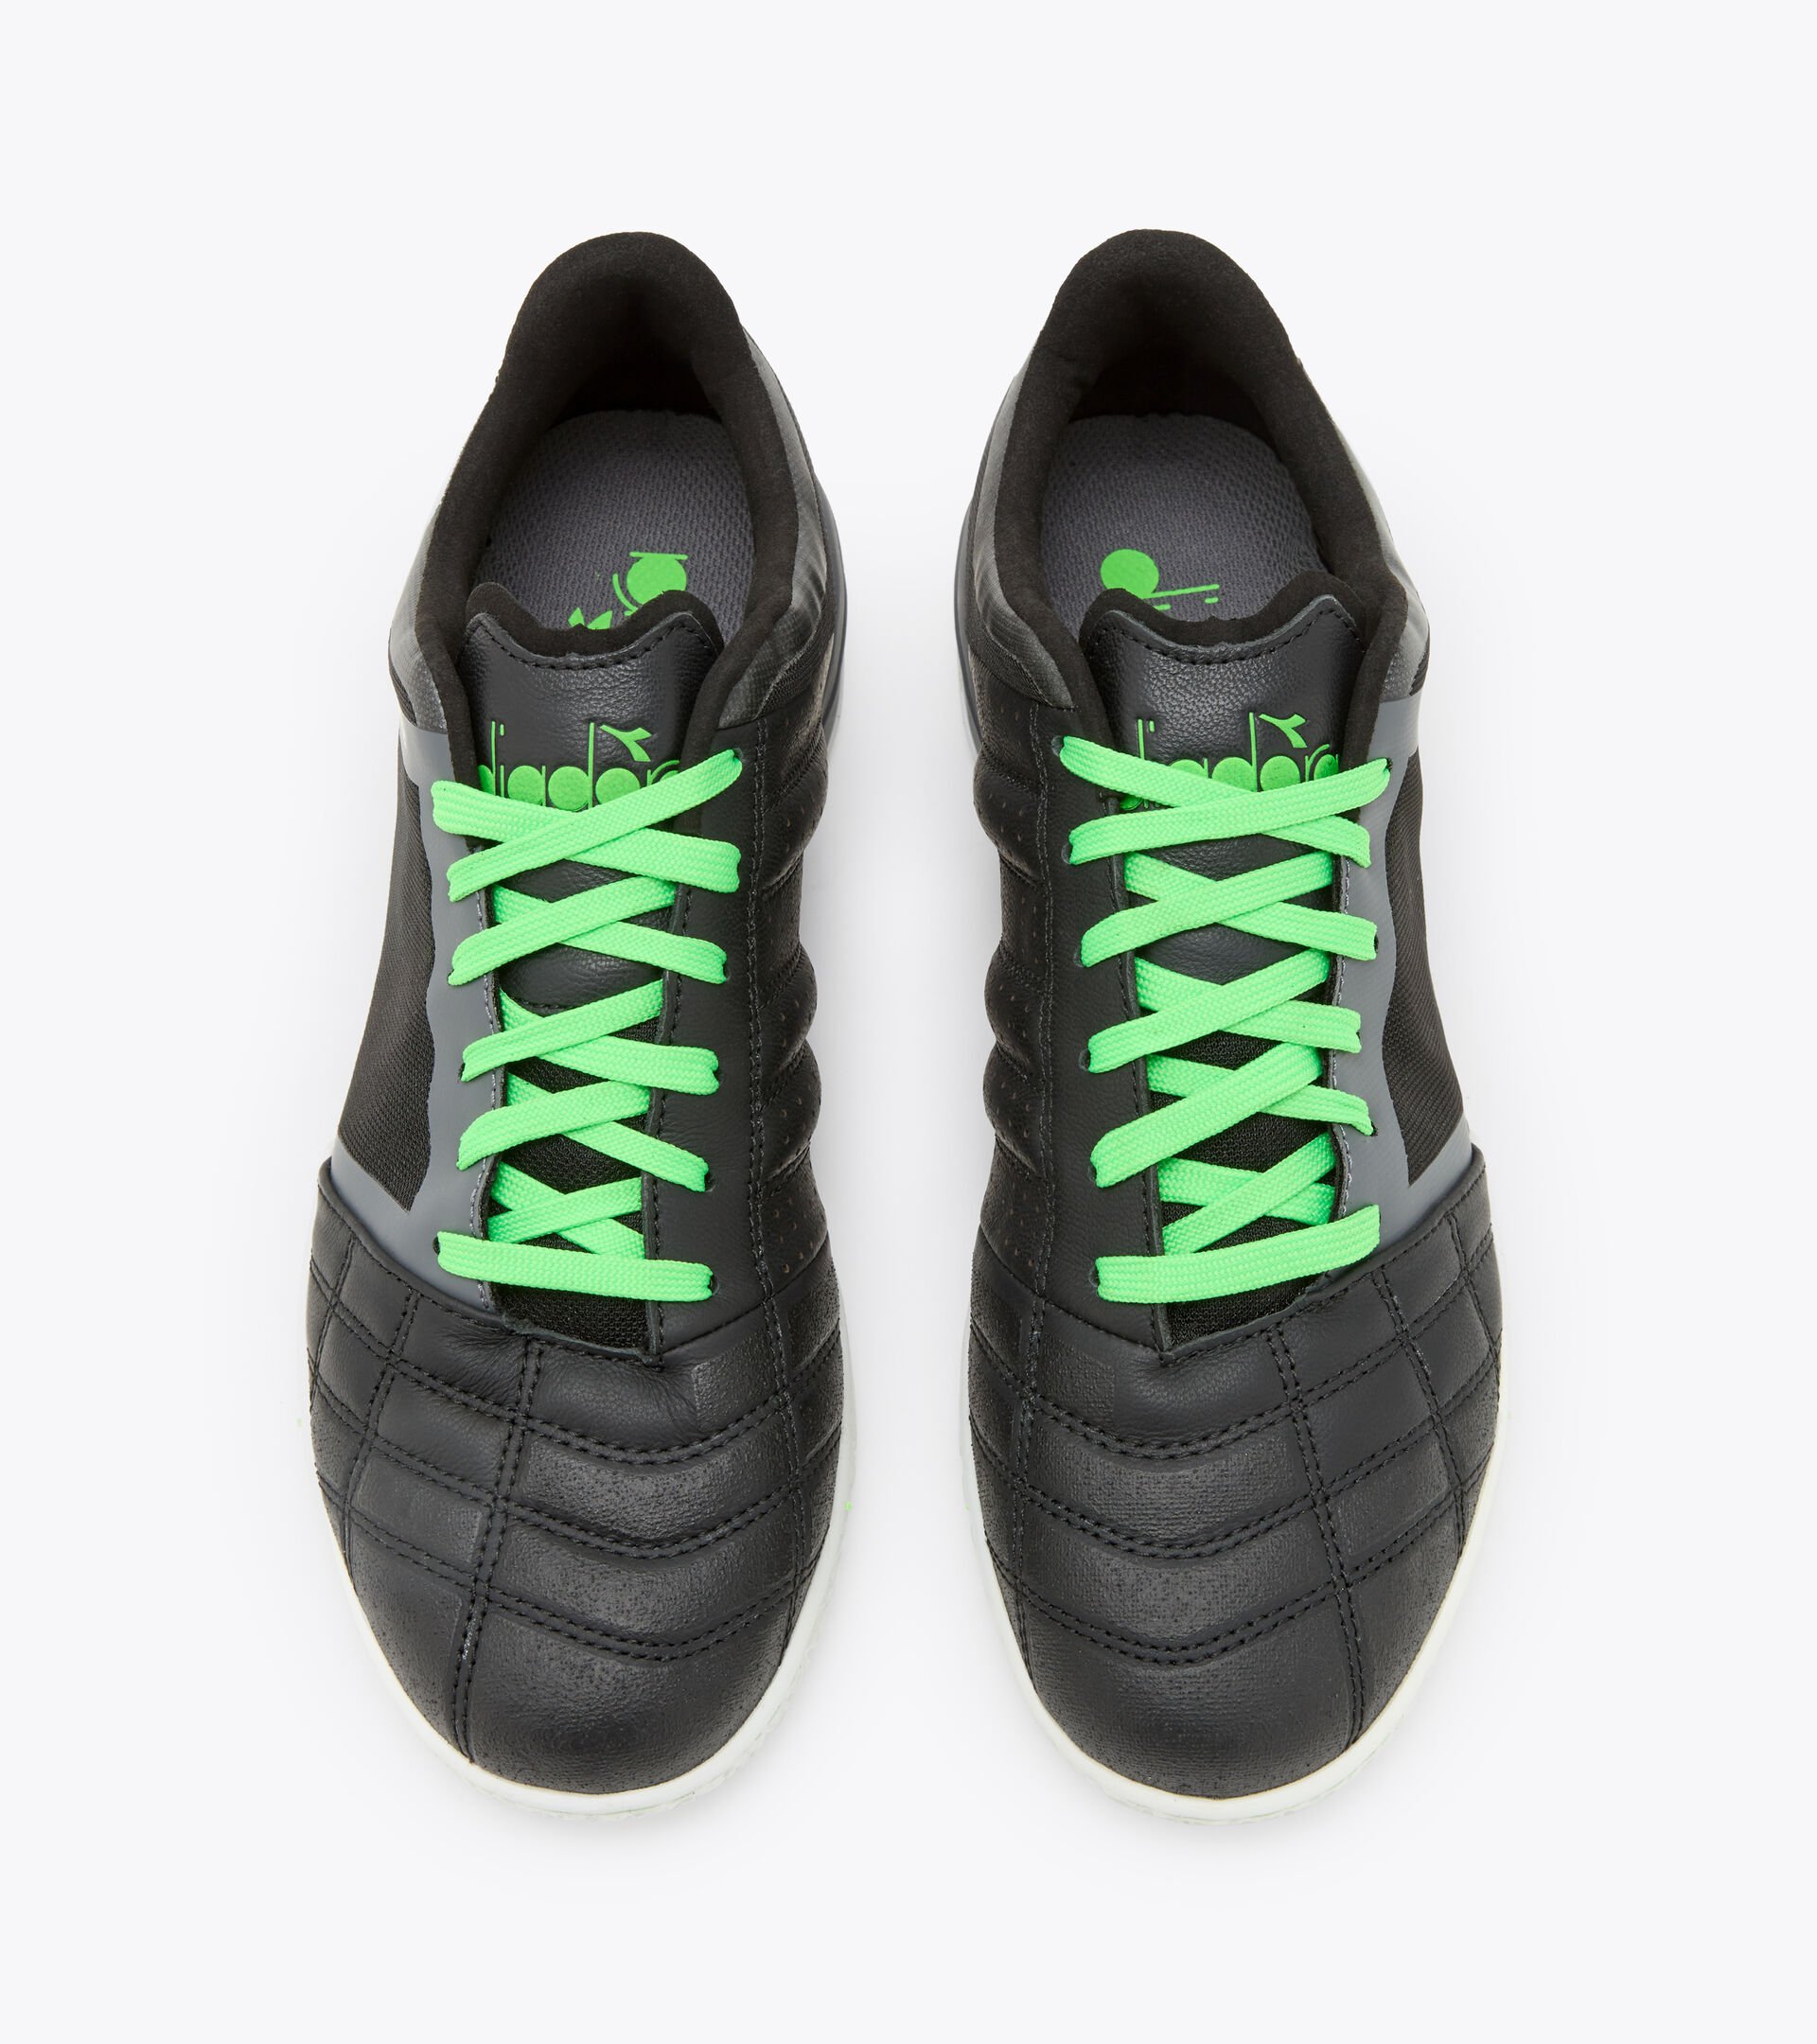 Futsal boot - Specific outsole for indoor grounds BRASIL SALA ID BLACK/GREEN FLUO - Diadora